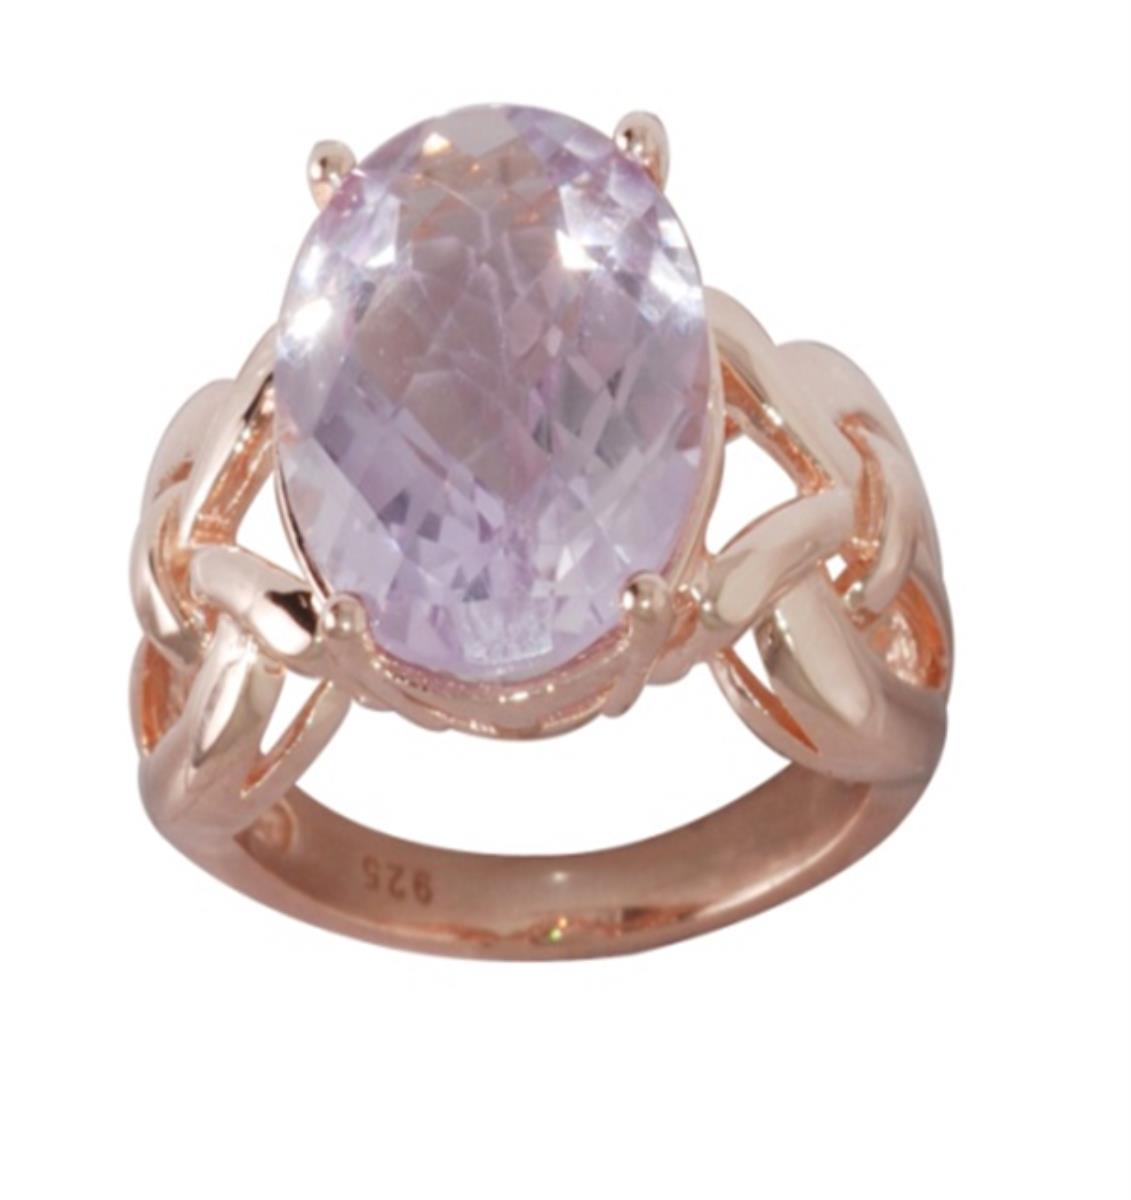 10K Rose Gold 16x12mm Oval Cut Pink Amethyst Open Link Sides Solitaire Ring